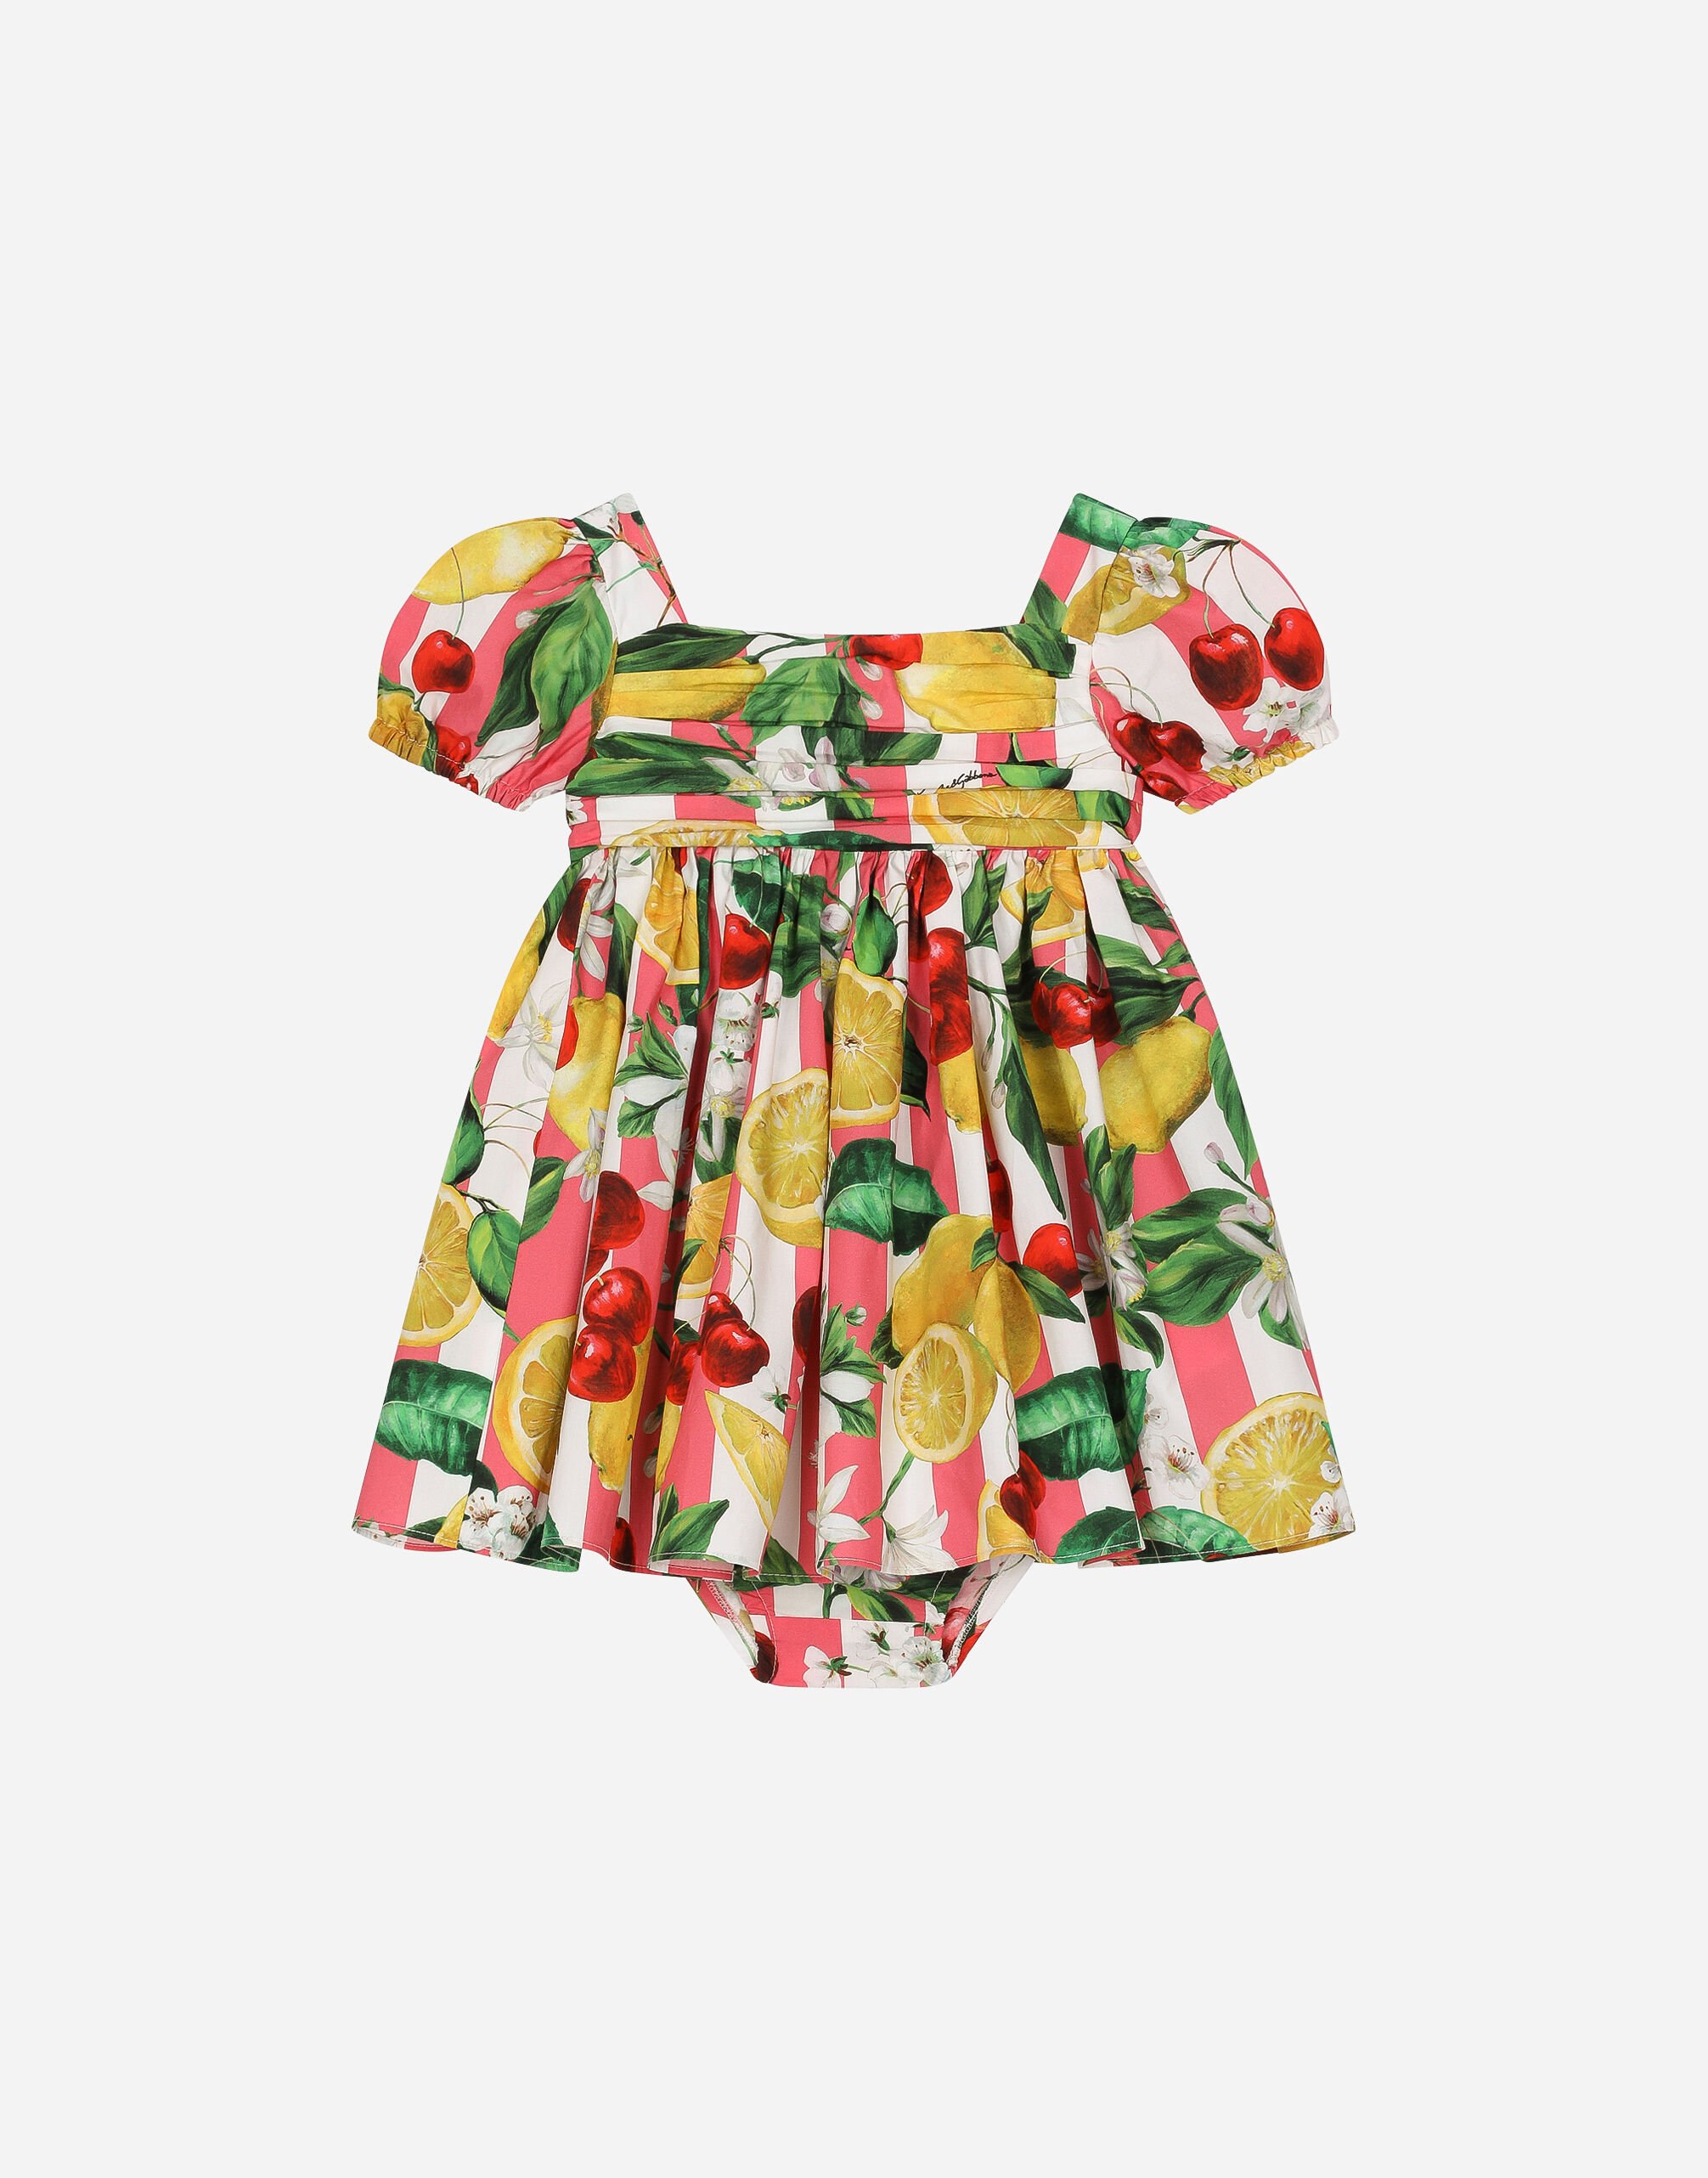 Dolce & Gabbana Poplin dress with bloomers and lemon and cherry print Imprima L23DI5HS5Q9